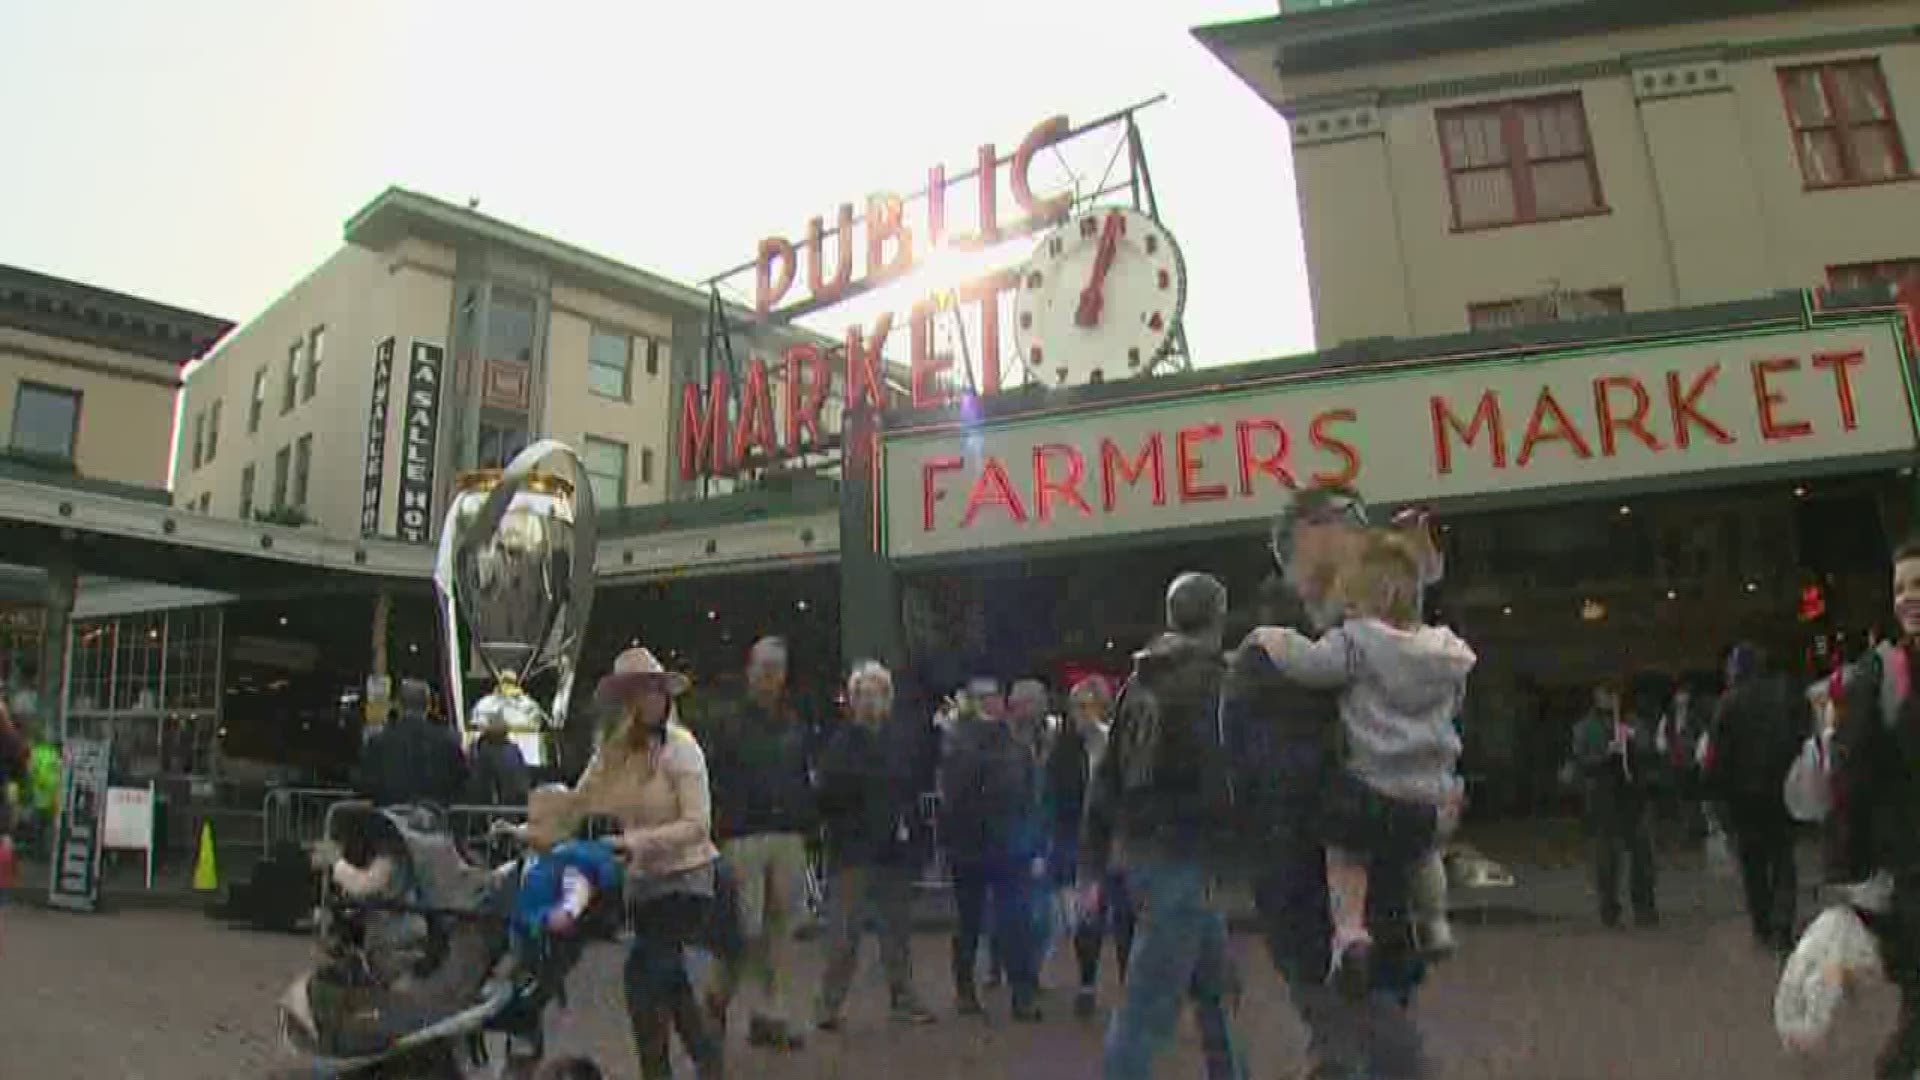 The Philip F. Anschutz Trophy was on display at Pike Place Market ahead of the MLS championship match between the Seattle Sounders and Toronto FC.